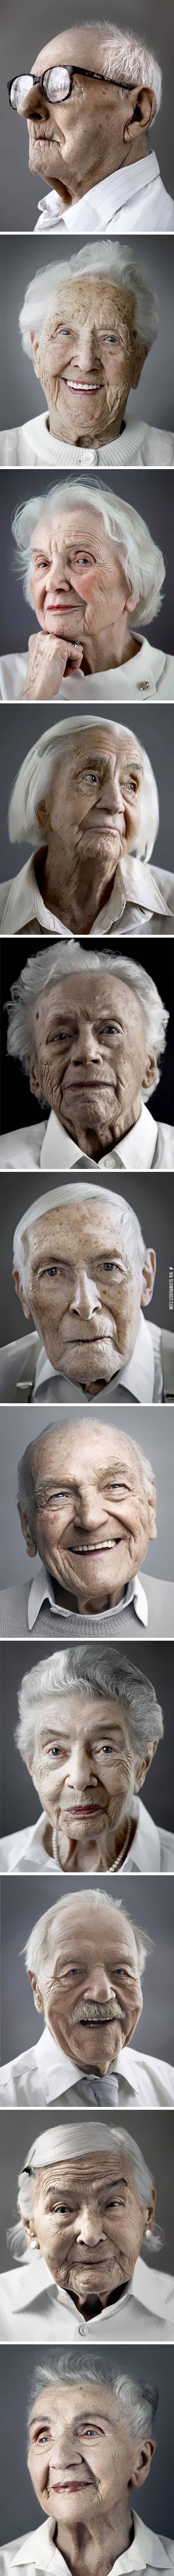 What+100+years+old+looks+like.